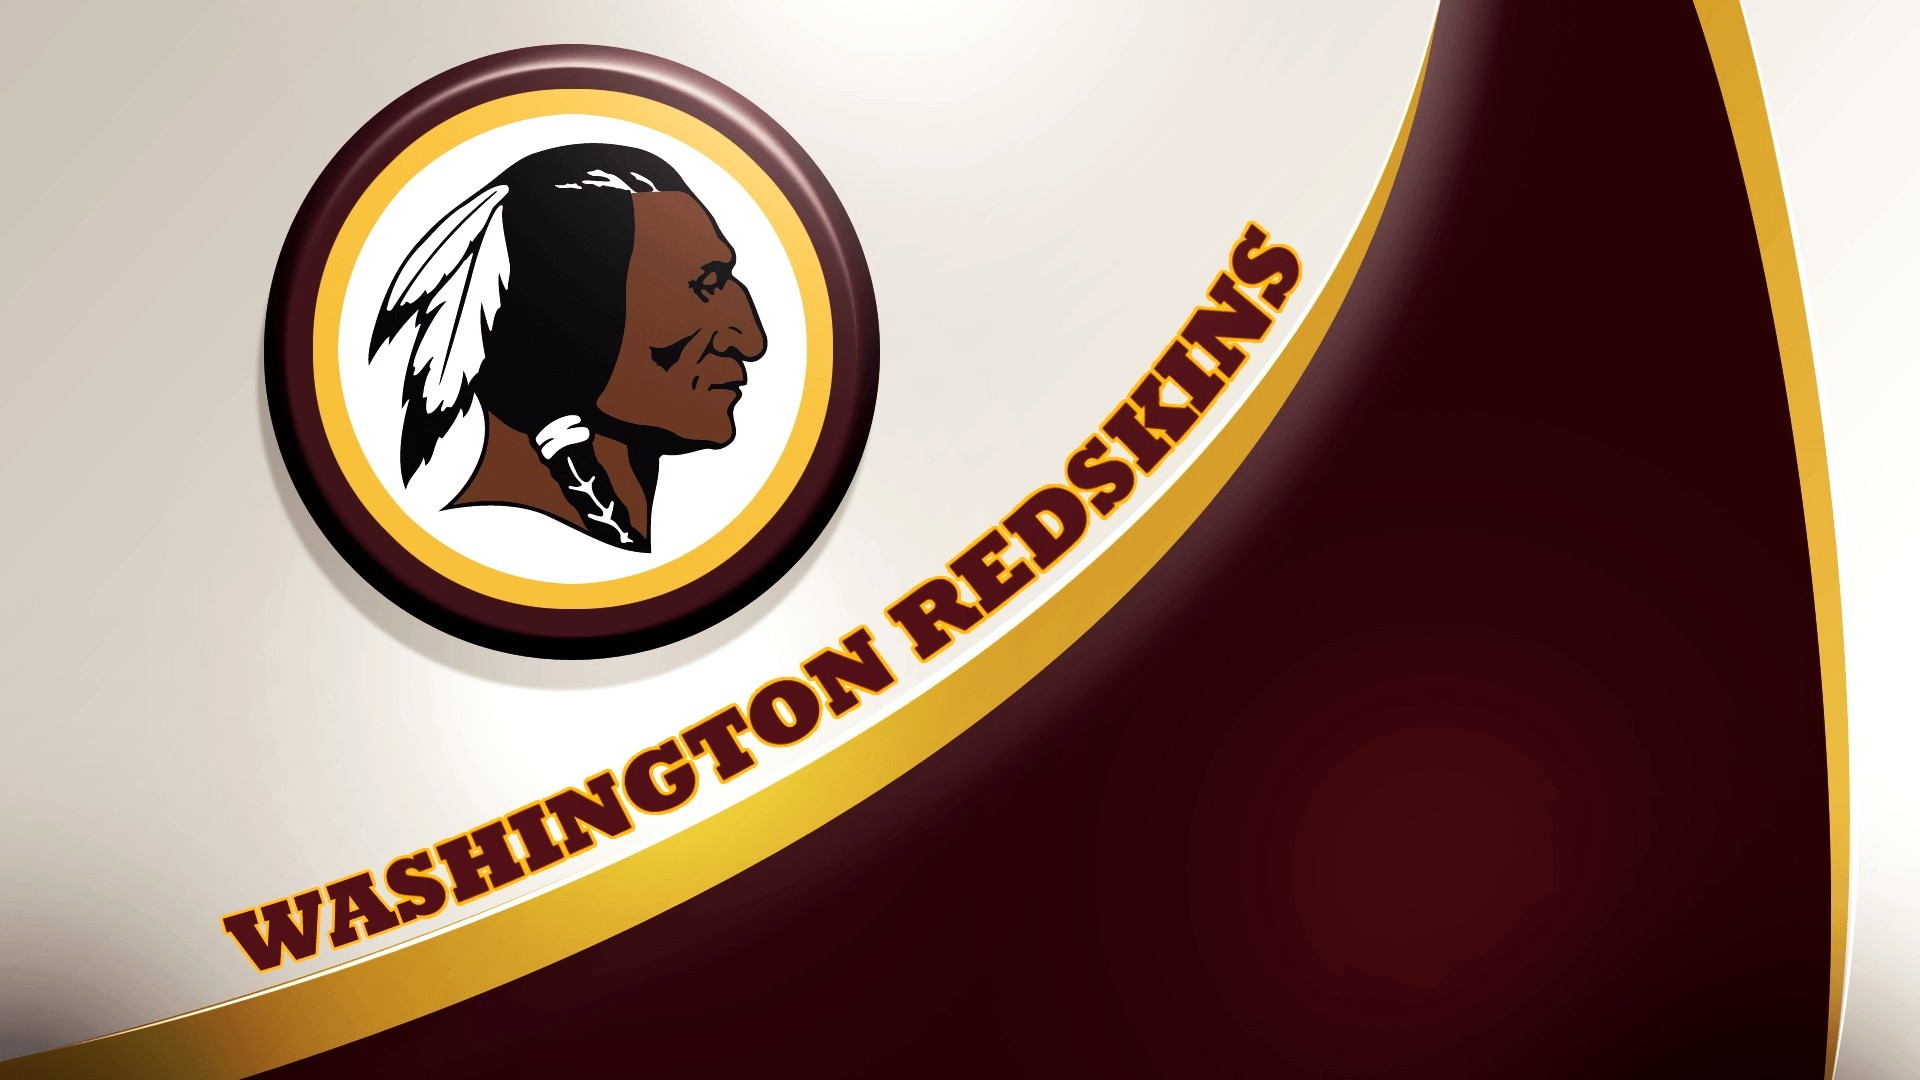 Washington Redskins Backgrounds HD with high-resolution 1920x1080 pixel. You can use and set as wallpaper for Notebook Screensavers, Mac Wallpapers, Mobile Home Screen, iPhone or Android Phones Lock Screen